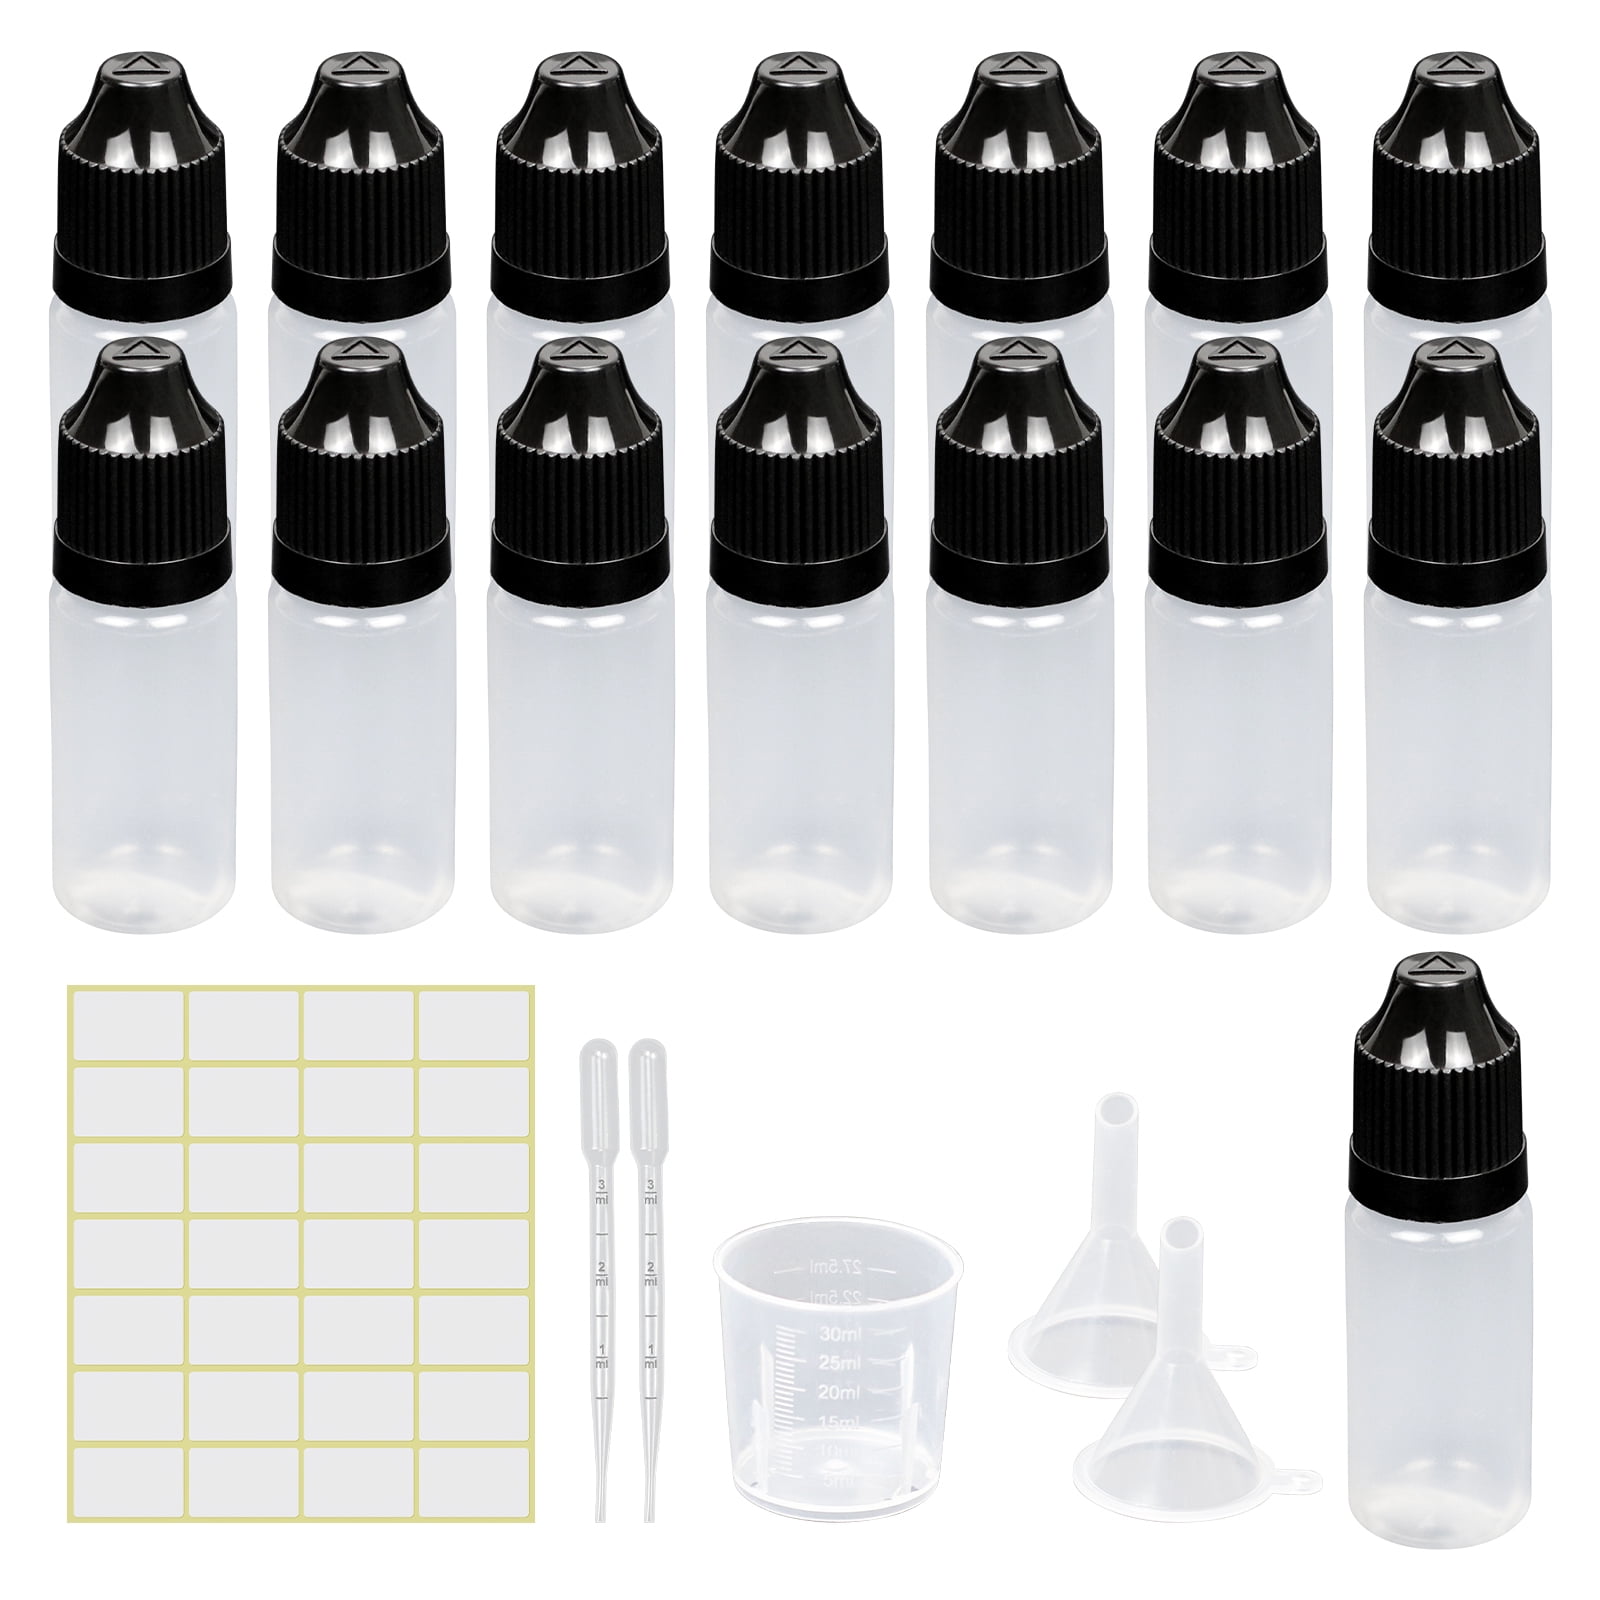 Skylety 24 Pack Mini Milk Jugs Plastic Gallon Jugs with Caps Water Juice  Milk Jug Empty HDPE Soda Bottles Gallon Containers for Liquids Smoothies